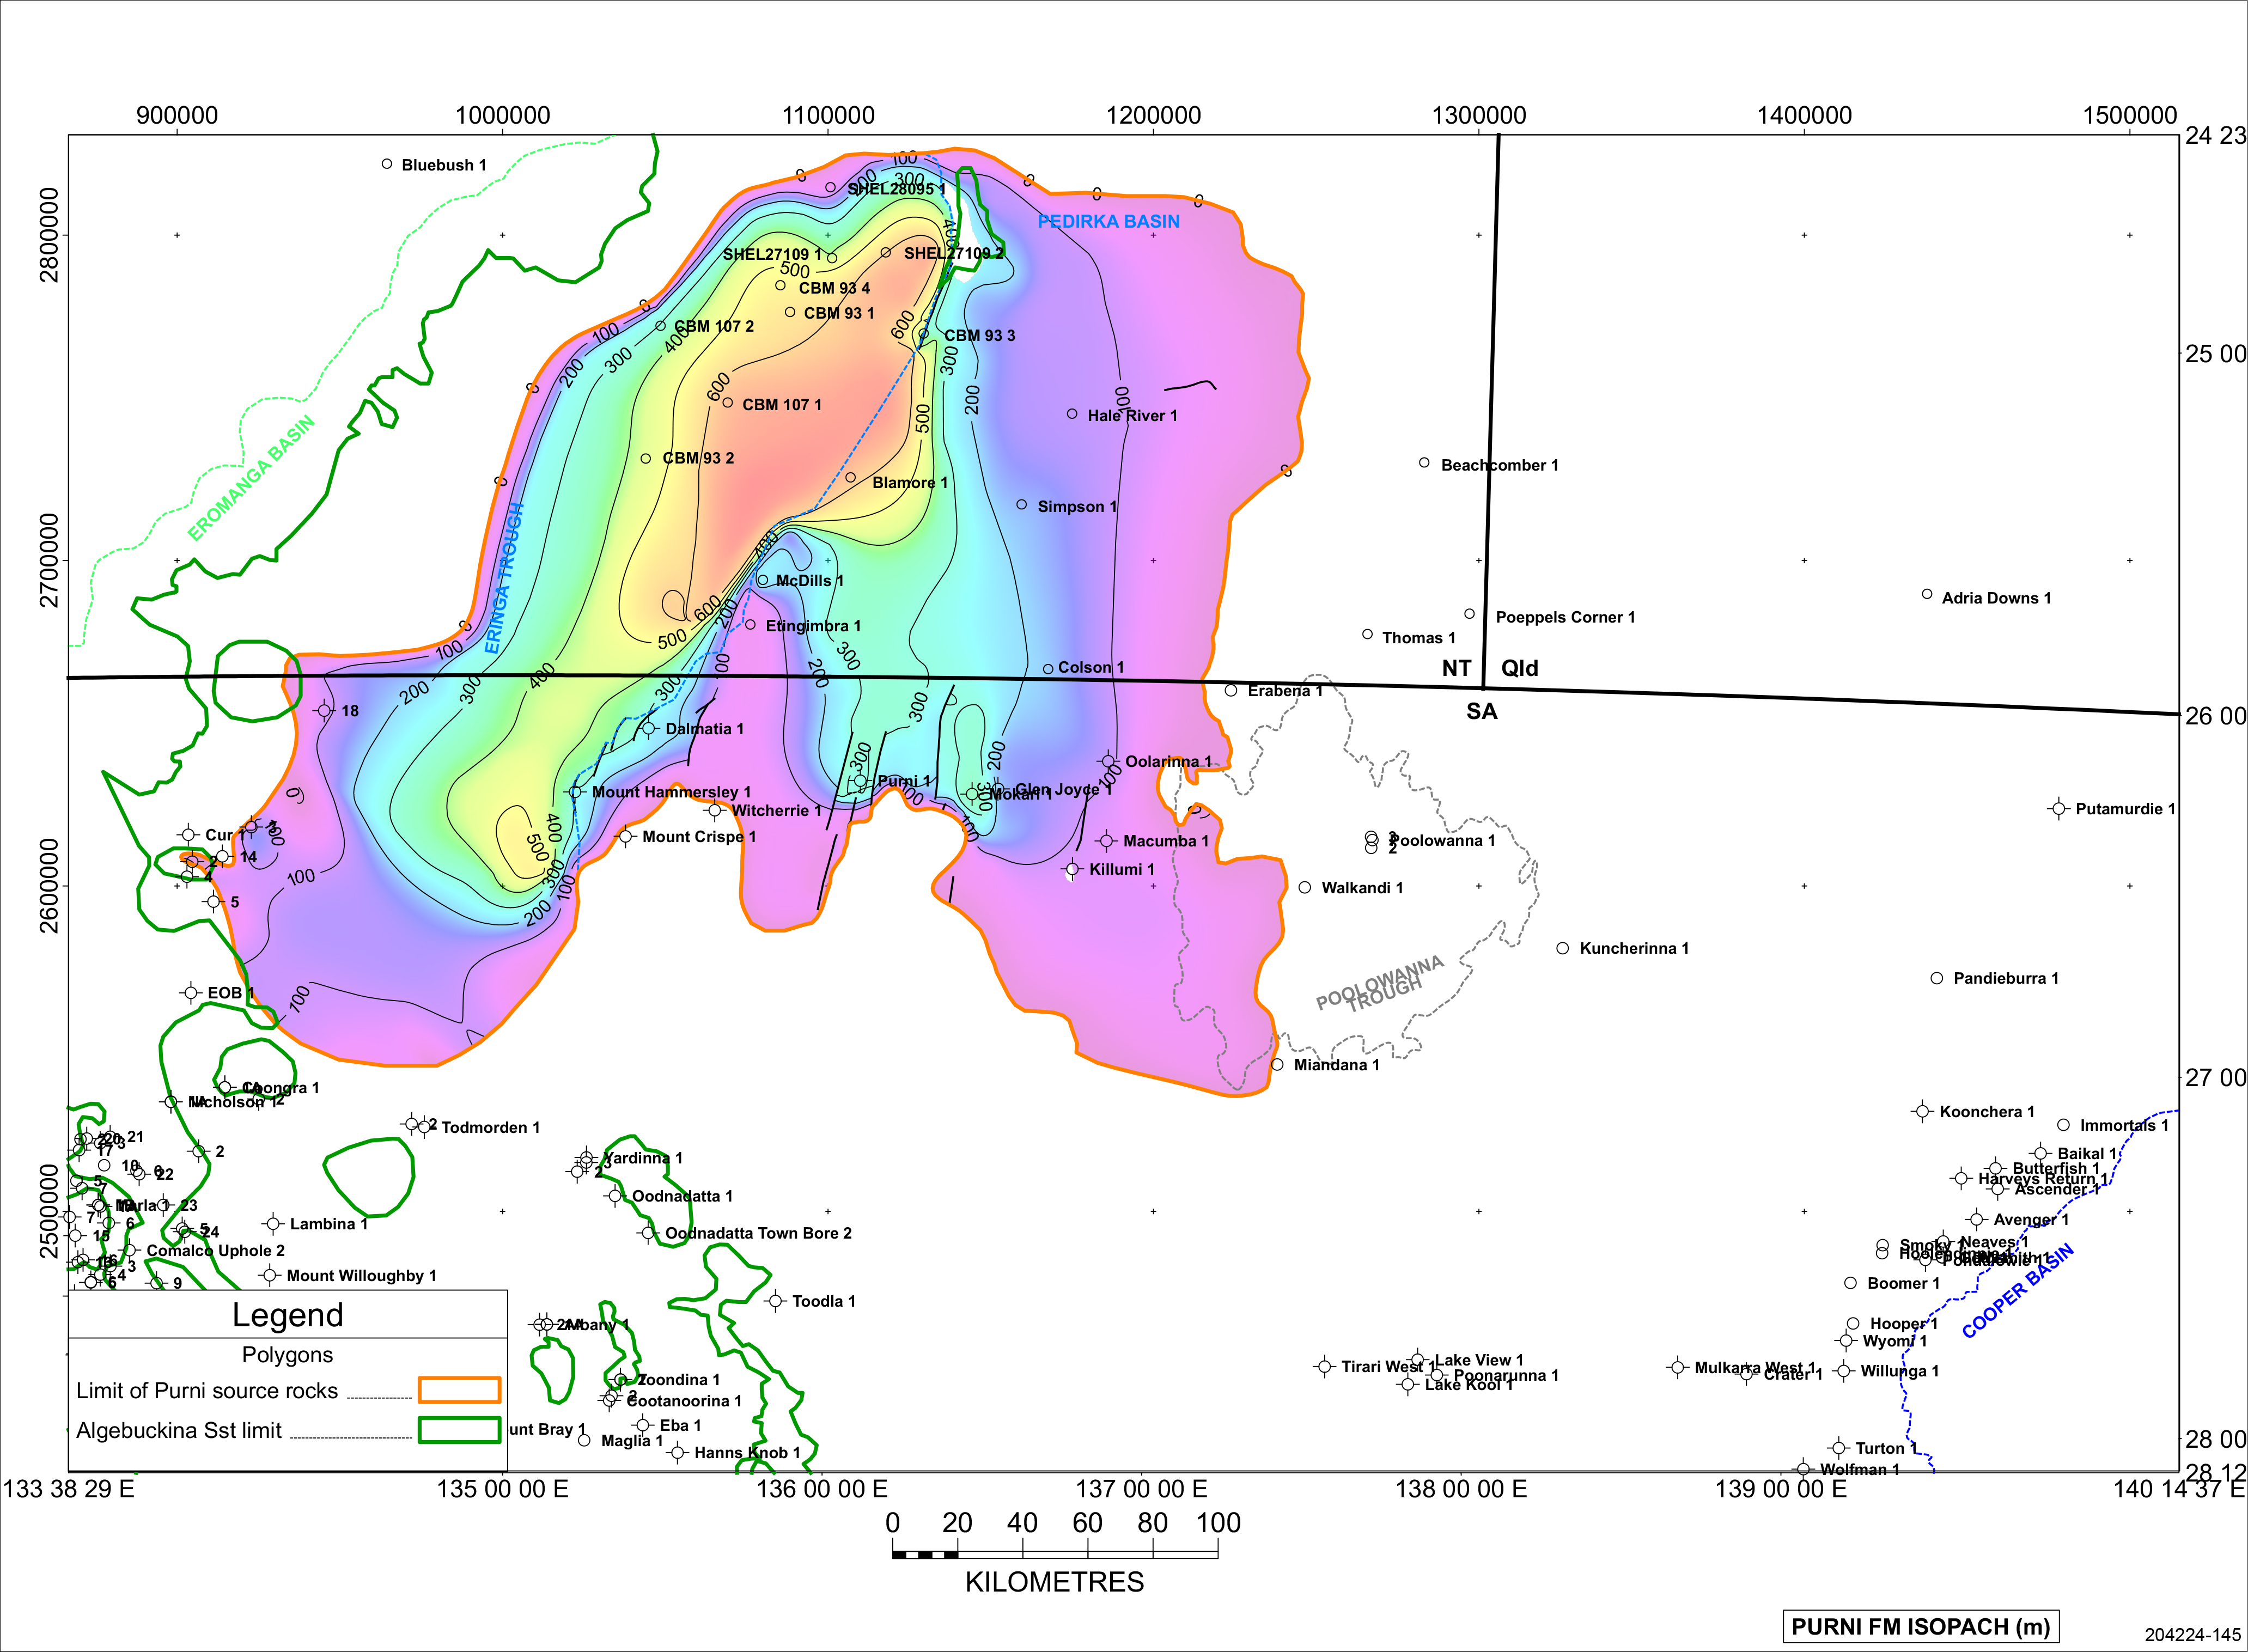 Thickness of the Purni Formation in the Pedirka Basin.